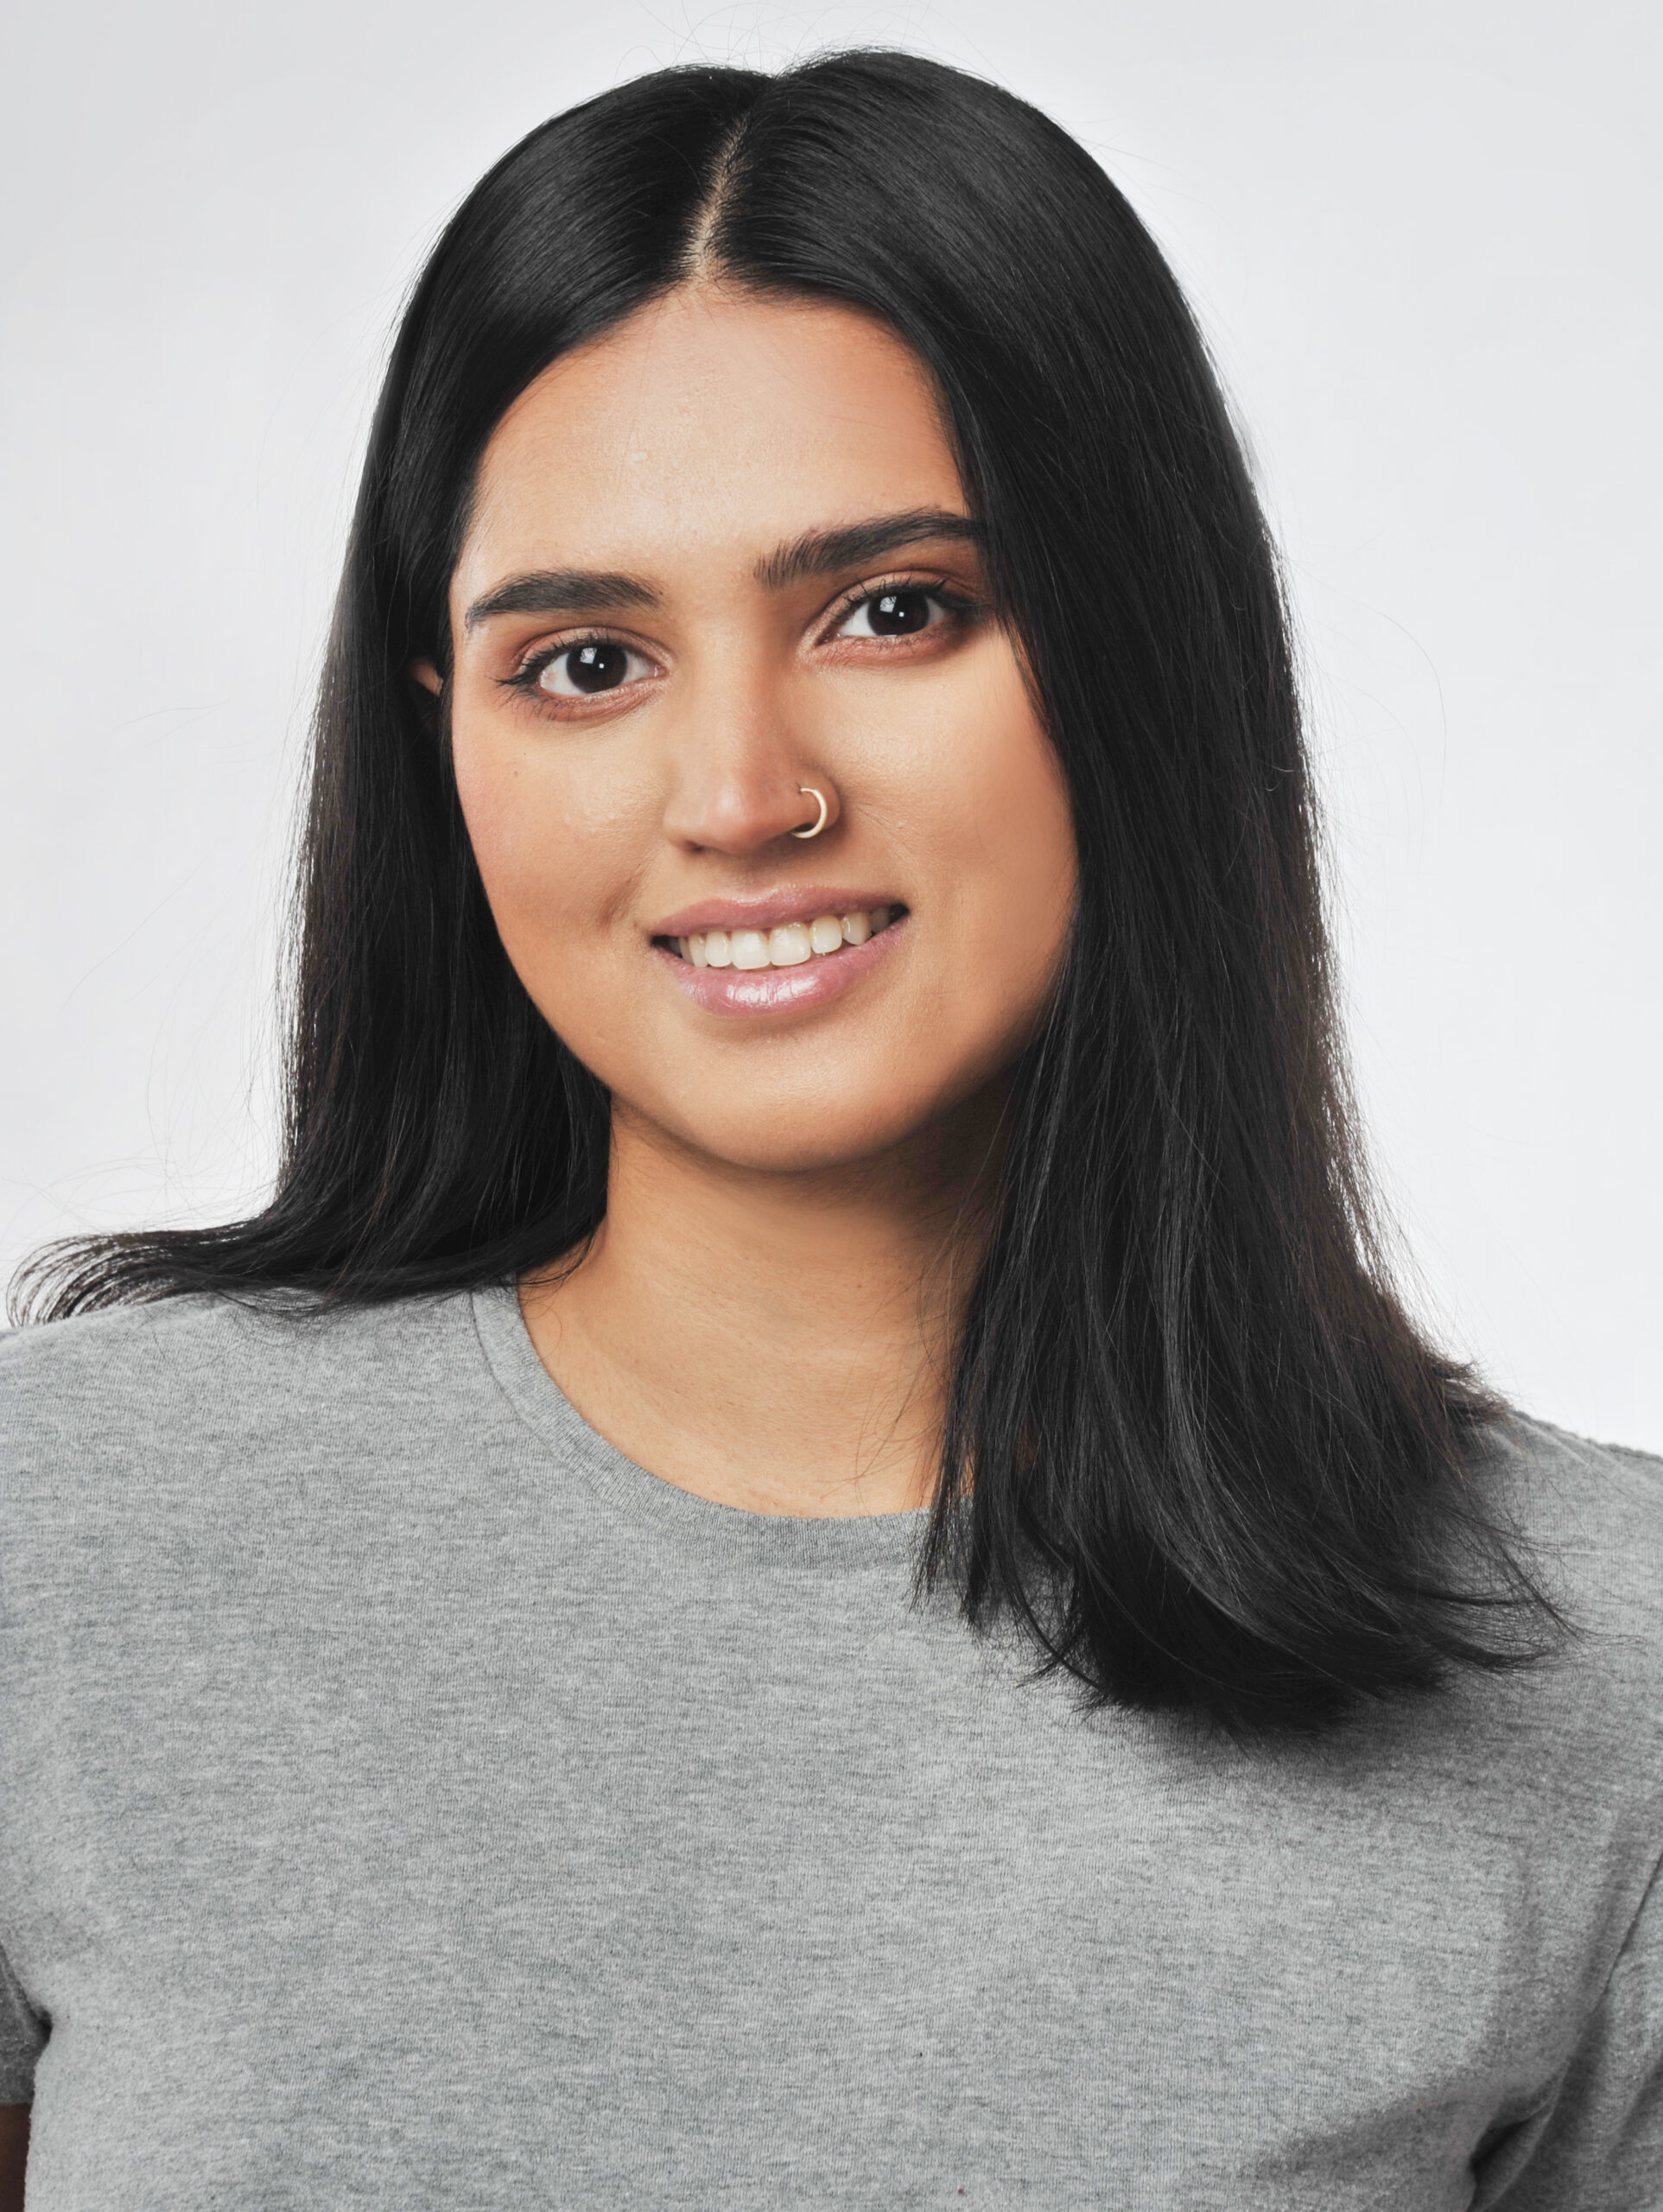 A photo of Purawai Vyas. She is a medium-light skinned woman with a nose ring, long dark hair and dark eyes. She's smiling at the camera.